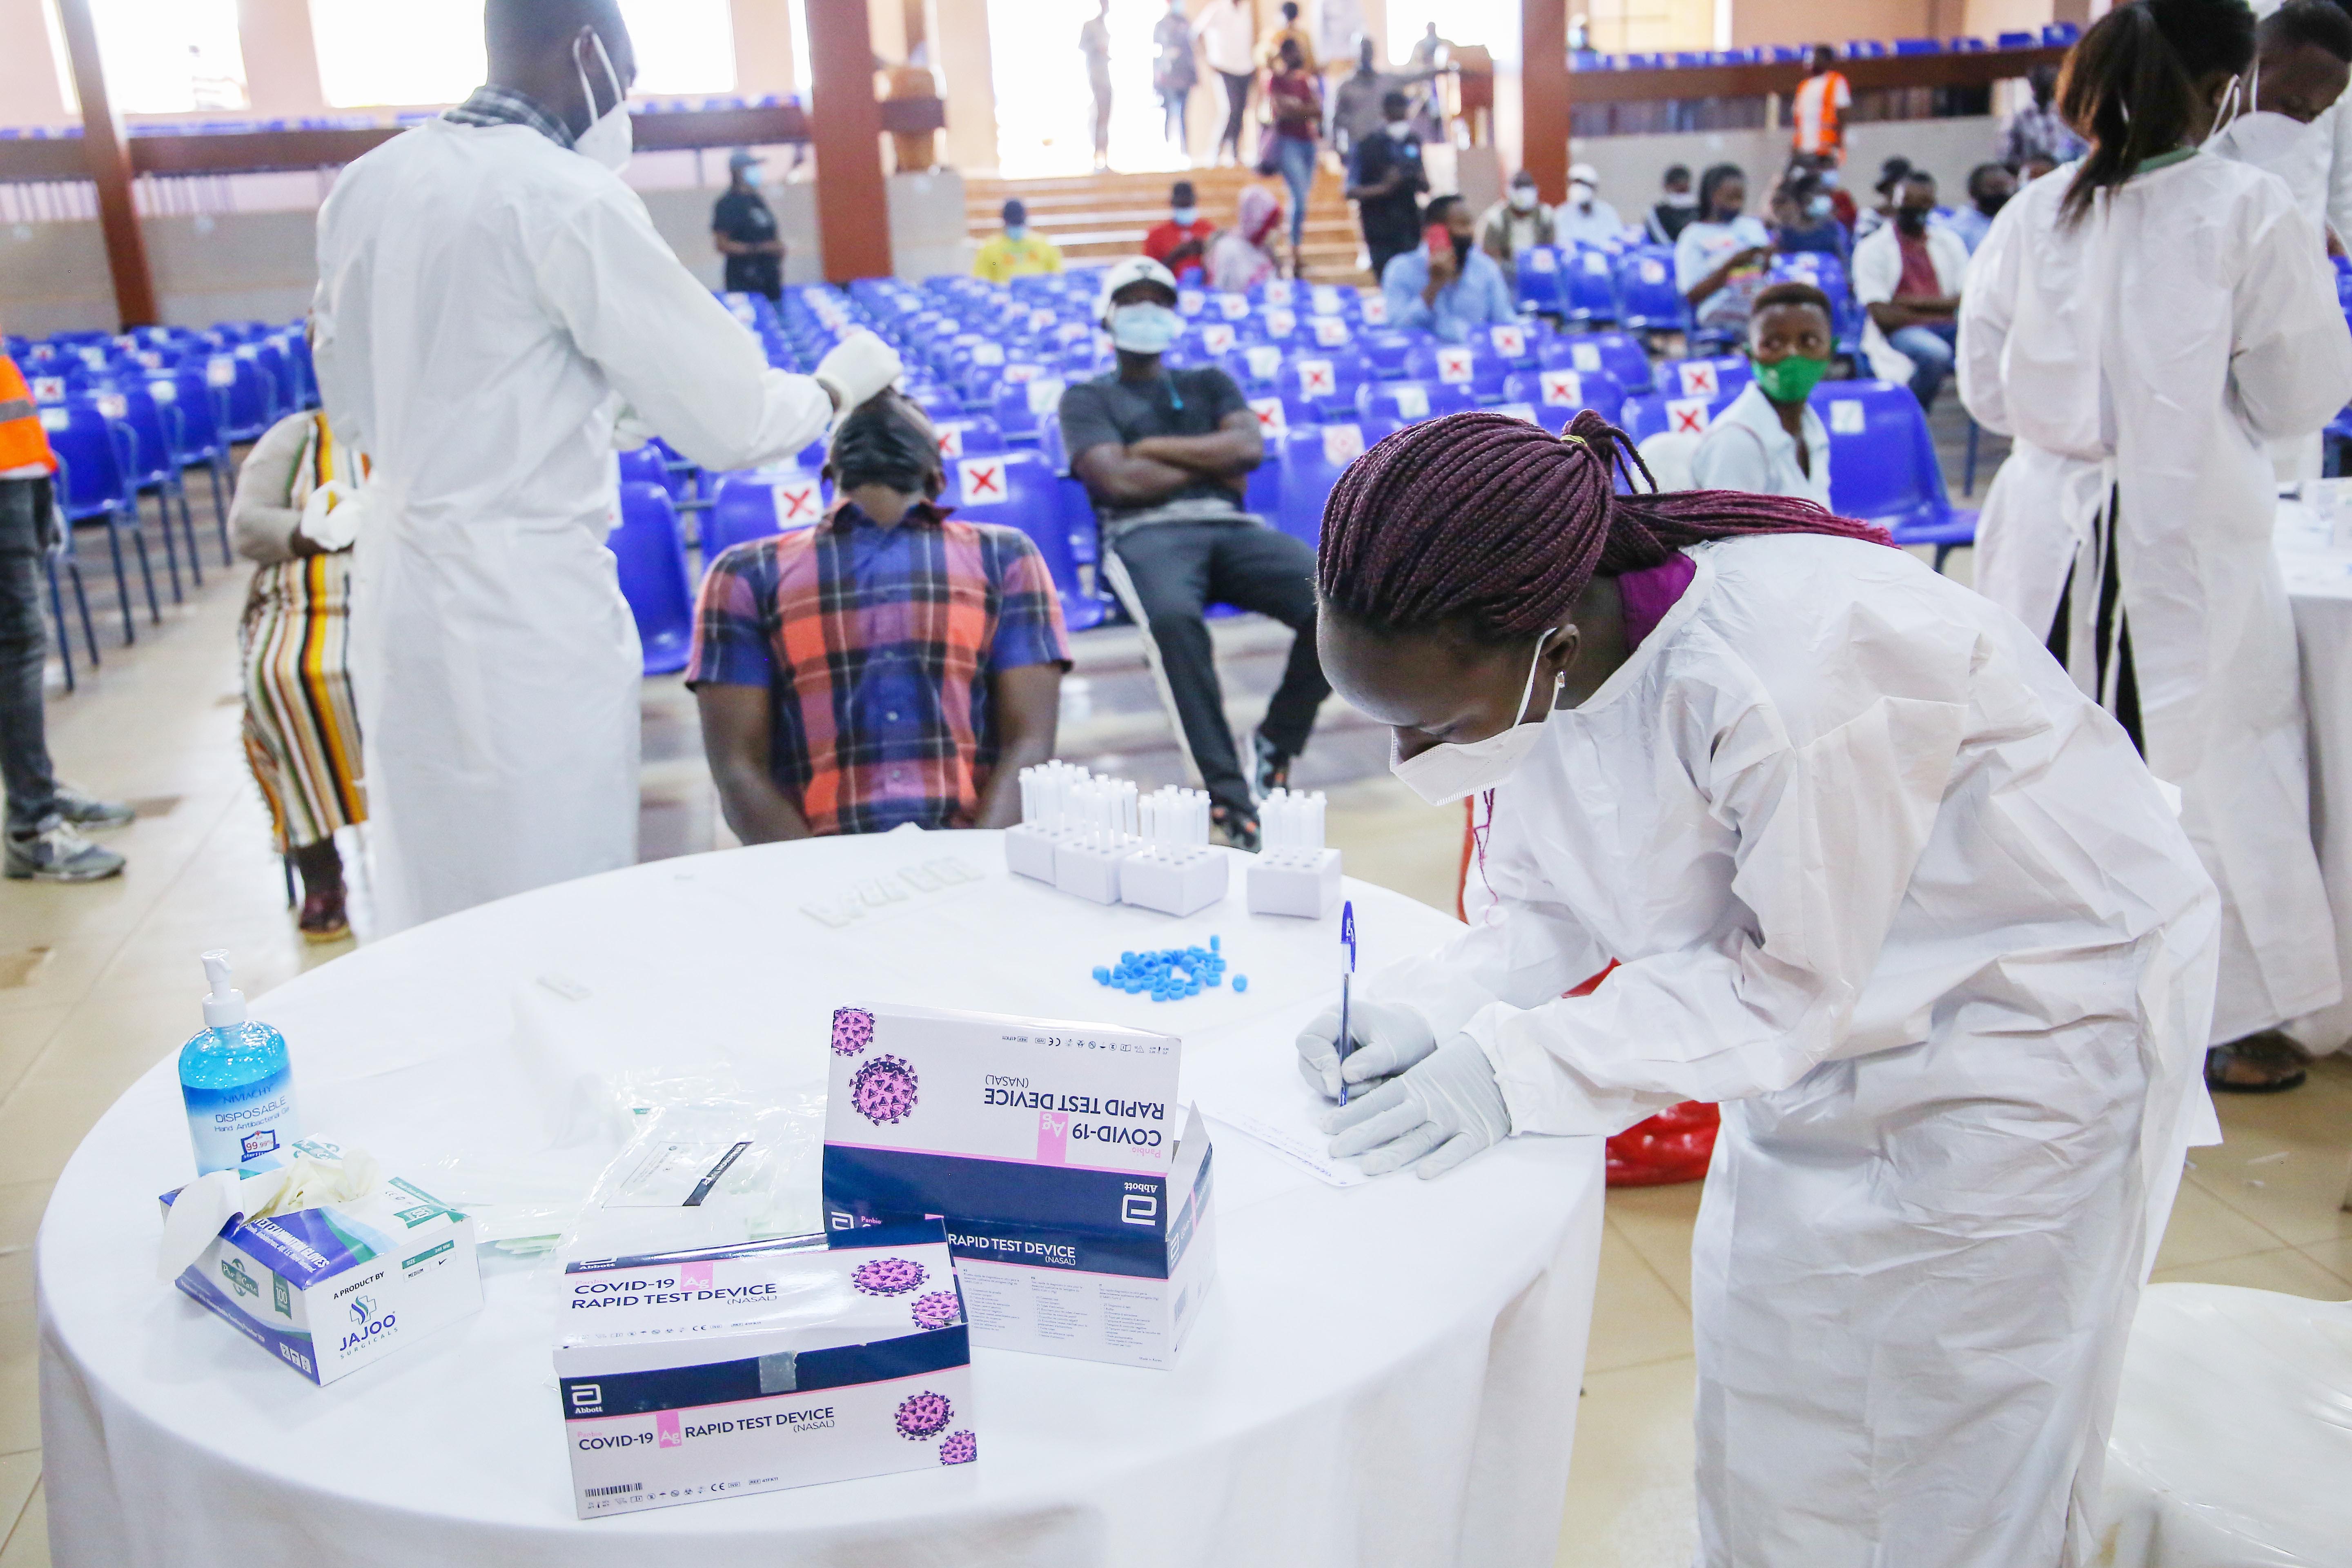 Health workers conduct the Covid 19 mass testing exercise in Nyamirambo in Kigali on July 23, 2021.Researchers in South Africa say that even though the Omicron variant of coronavirus spreads quickly, the resulting infection may be less severe than other forms of Covid-19. . Dan Nsengiyumva